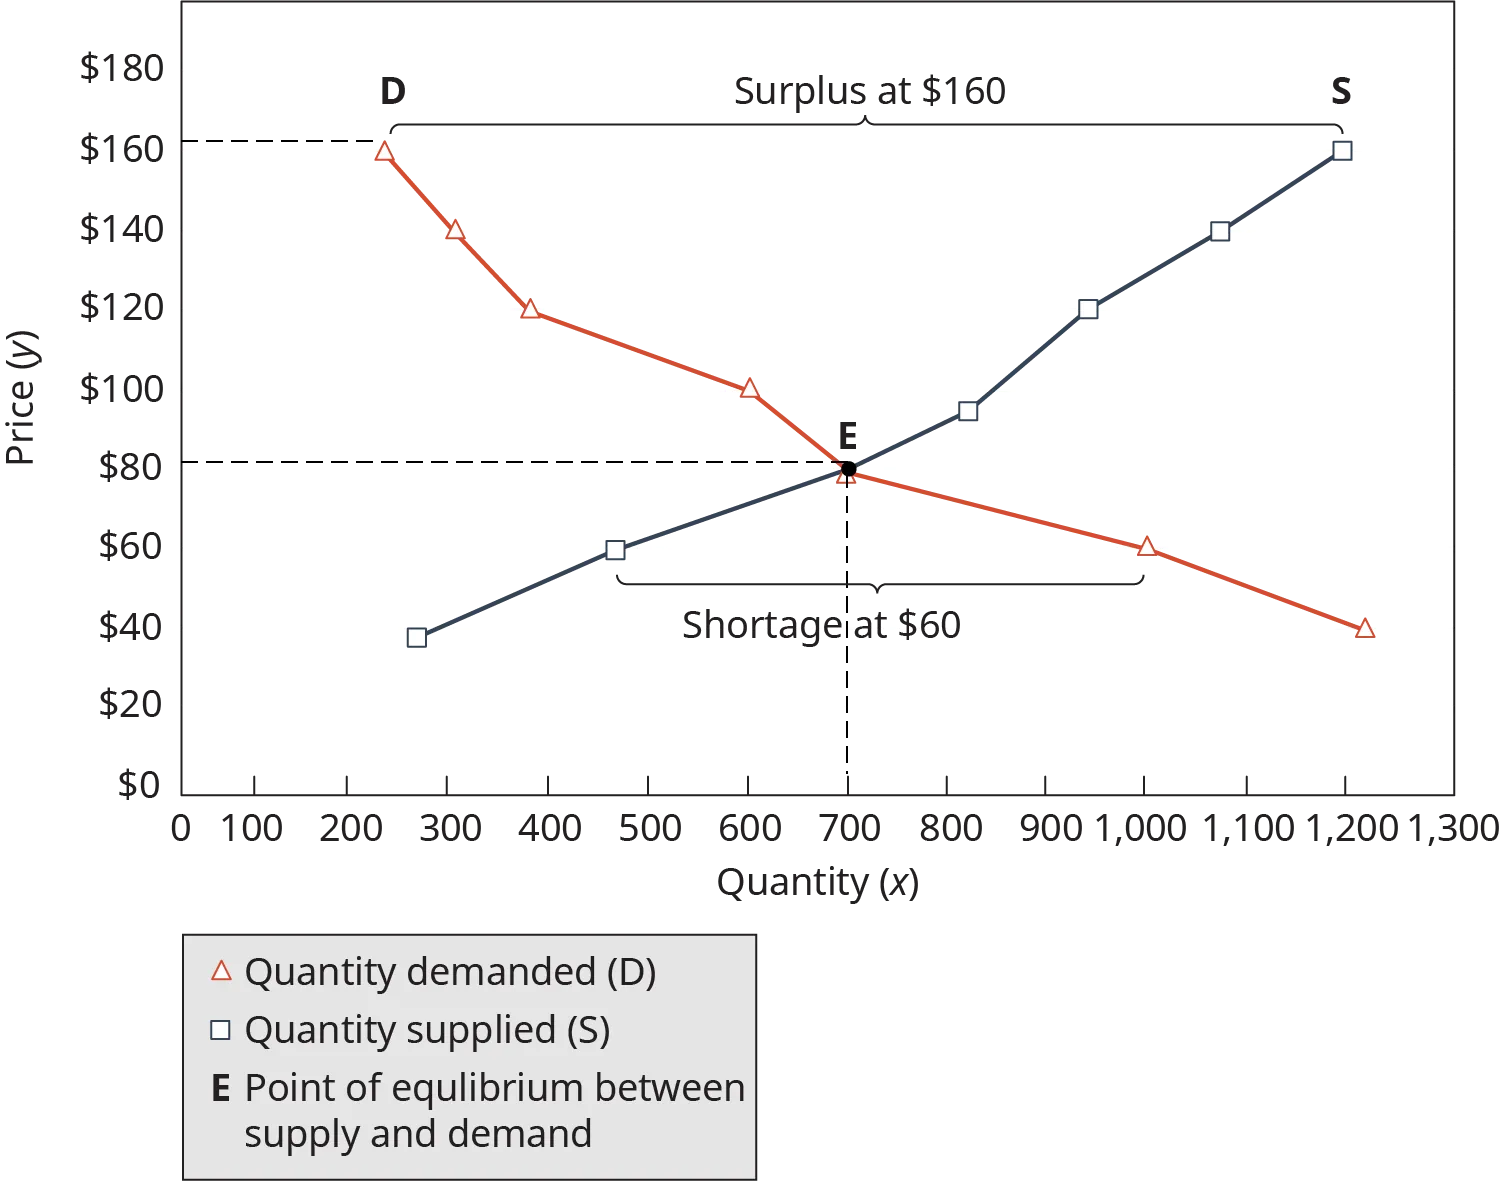 The x axis is labeled quantity, and the y axis is labeled price. The quantity demanded line, labeled D, falls from the upper left of the graph from approximate point 275, $160, to the bottom right of the graph at approximate point 1225, $45. The quantity supplied line, labeled S, rises from lower left to upper right, from approximate point 275, $40, to the upper right point 1200, $160. These lines intersect at a point labeled E, the point of equilibrium between supply and demand. Point E is at approximately 700, $80. Above point E, in between lines D and S, is labeled surplus at $160. Below point E, between lines D and S is labeled shortage at $60.